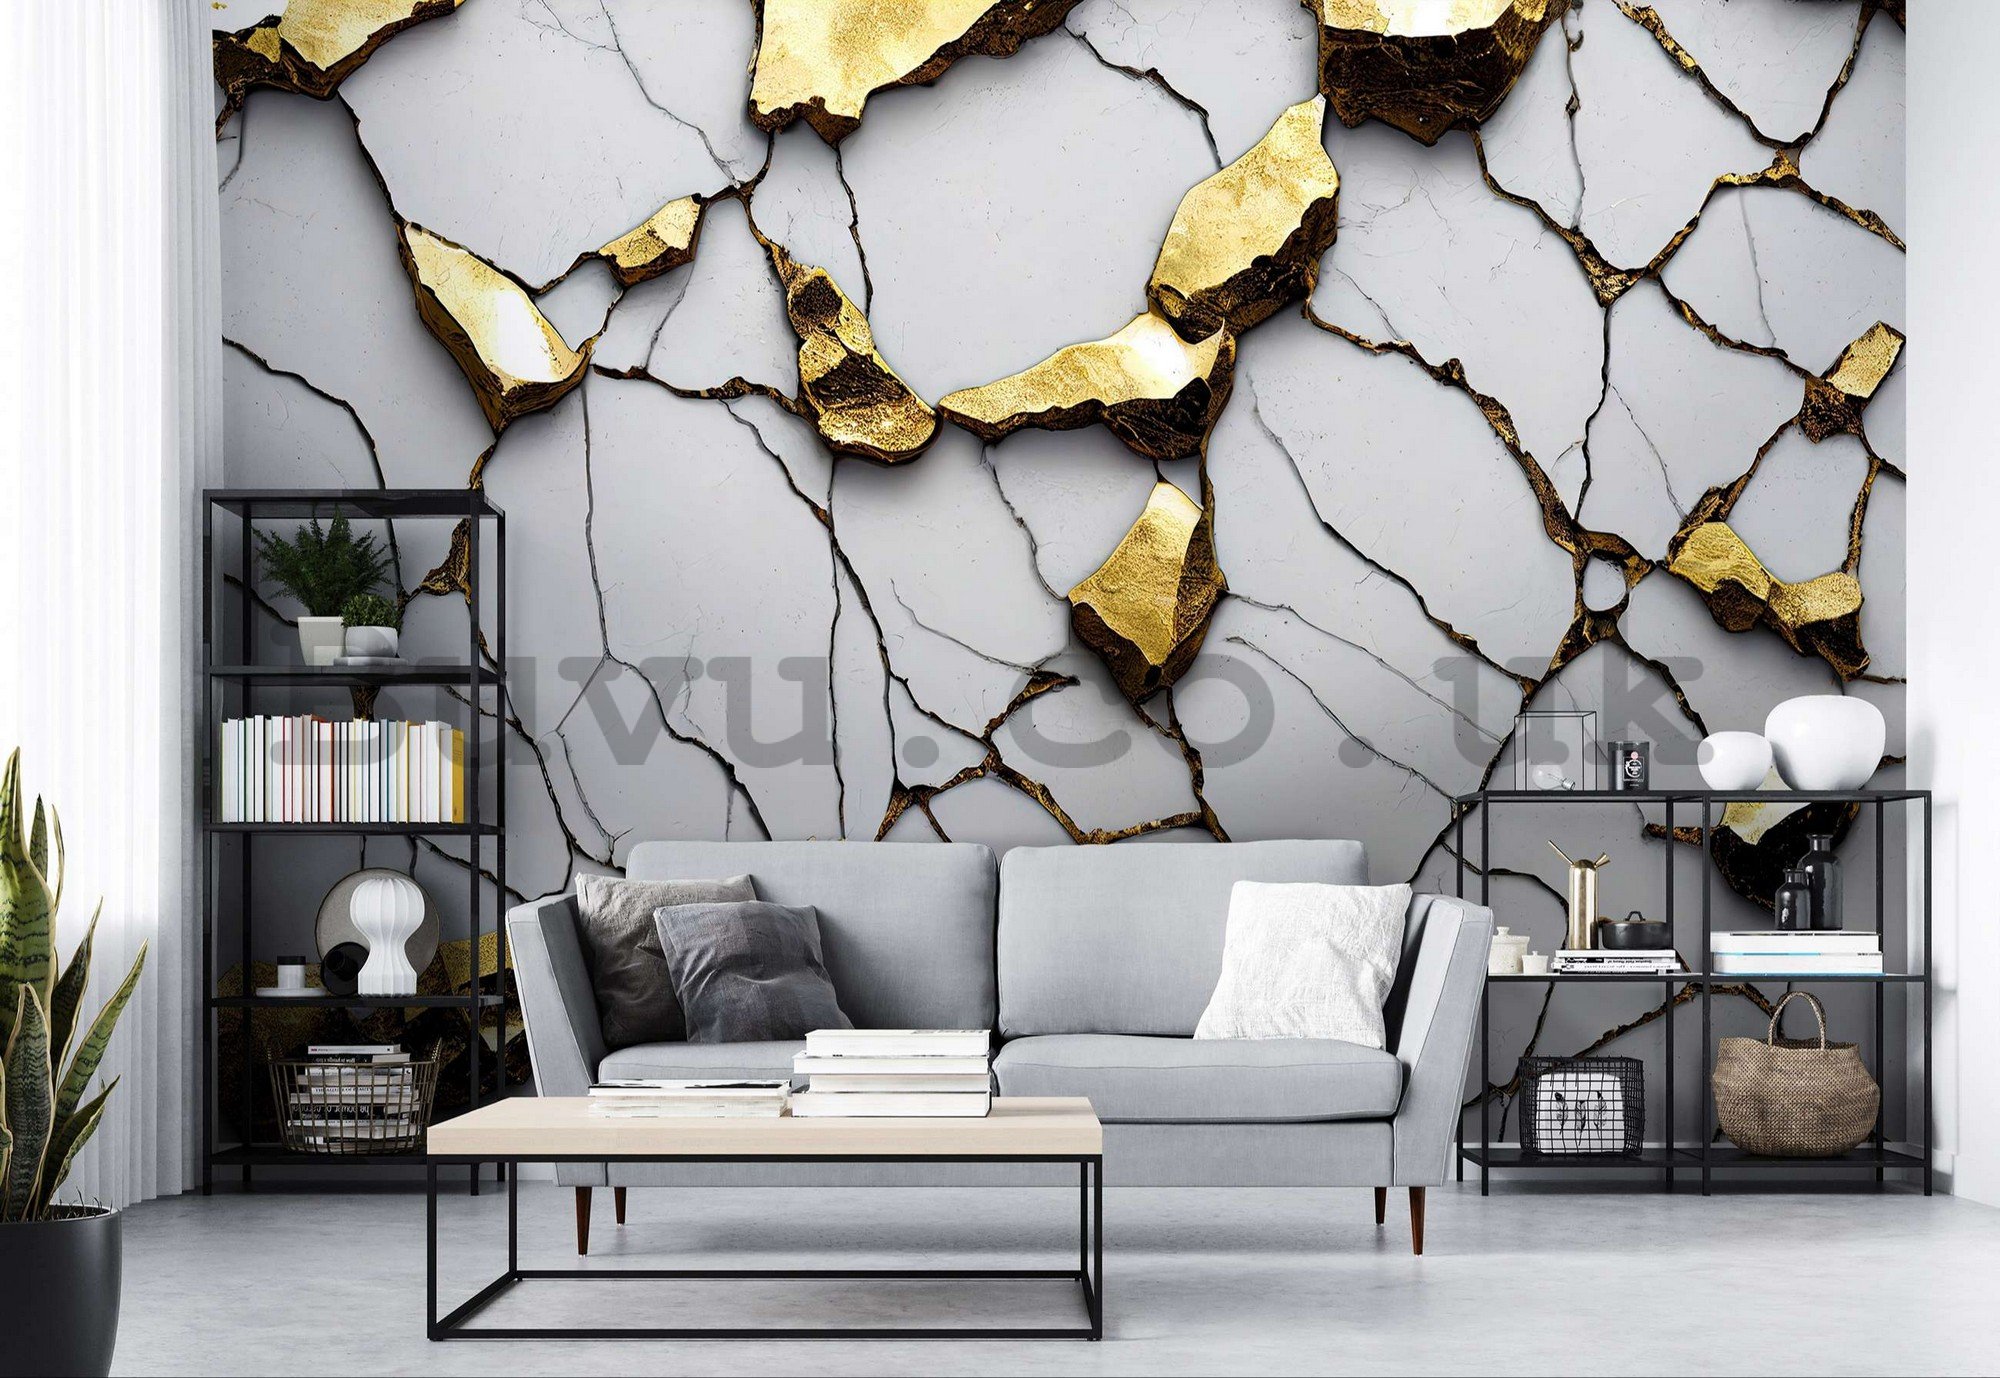 Wall mural vlies: Glamor imitation of golden marble with a white wall - 254x184 cm